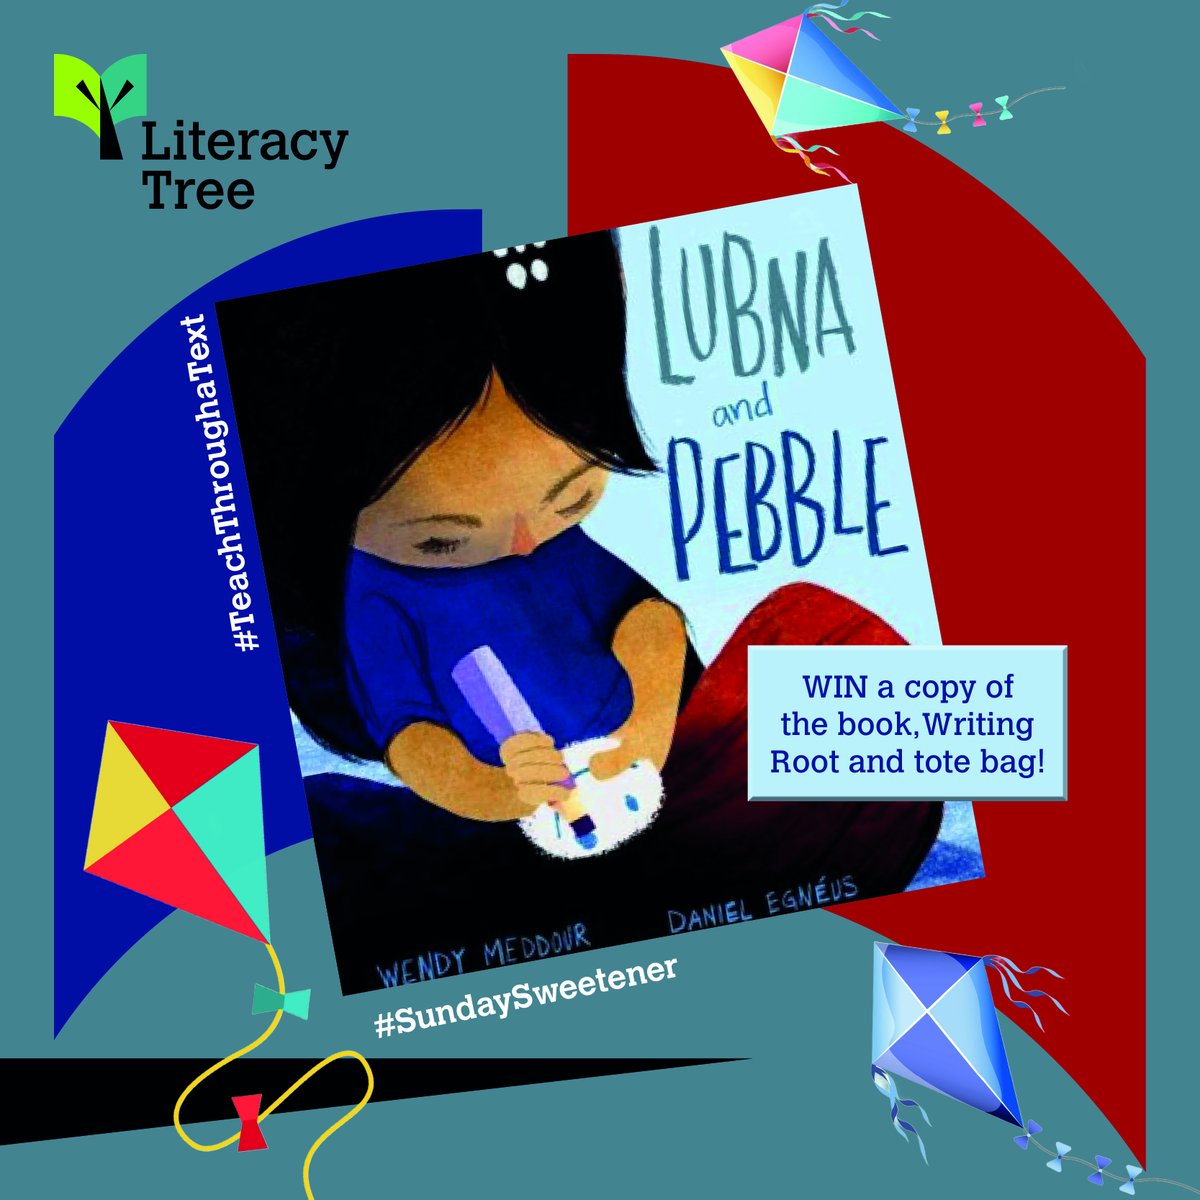 ✨Our #SundaySweetener this week is for a copy of Lubna and Pebble by @WendyMeddour, a powerful message about friendship. 🥰Repost and tag a friend in for an extra entry. Must be following. Will announce winner after 9pm.